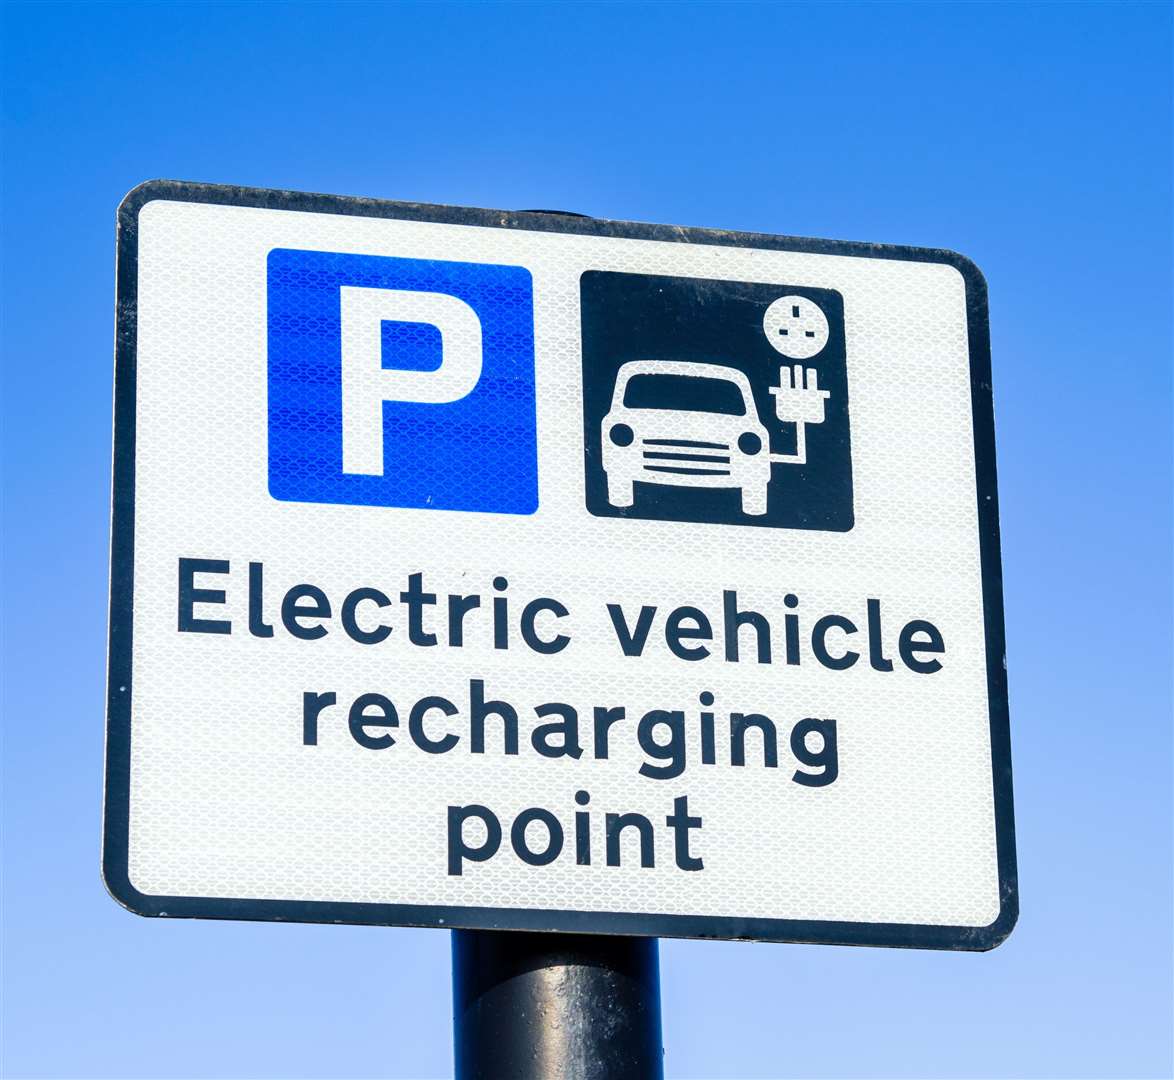 Are more electric vehicles the answer?